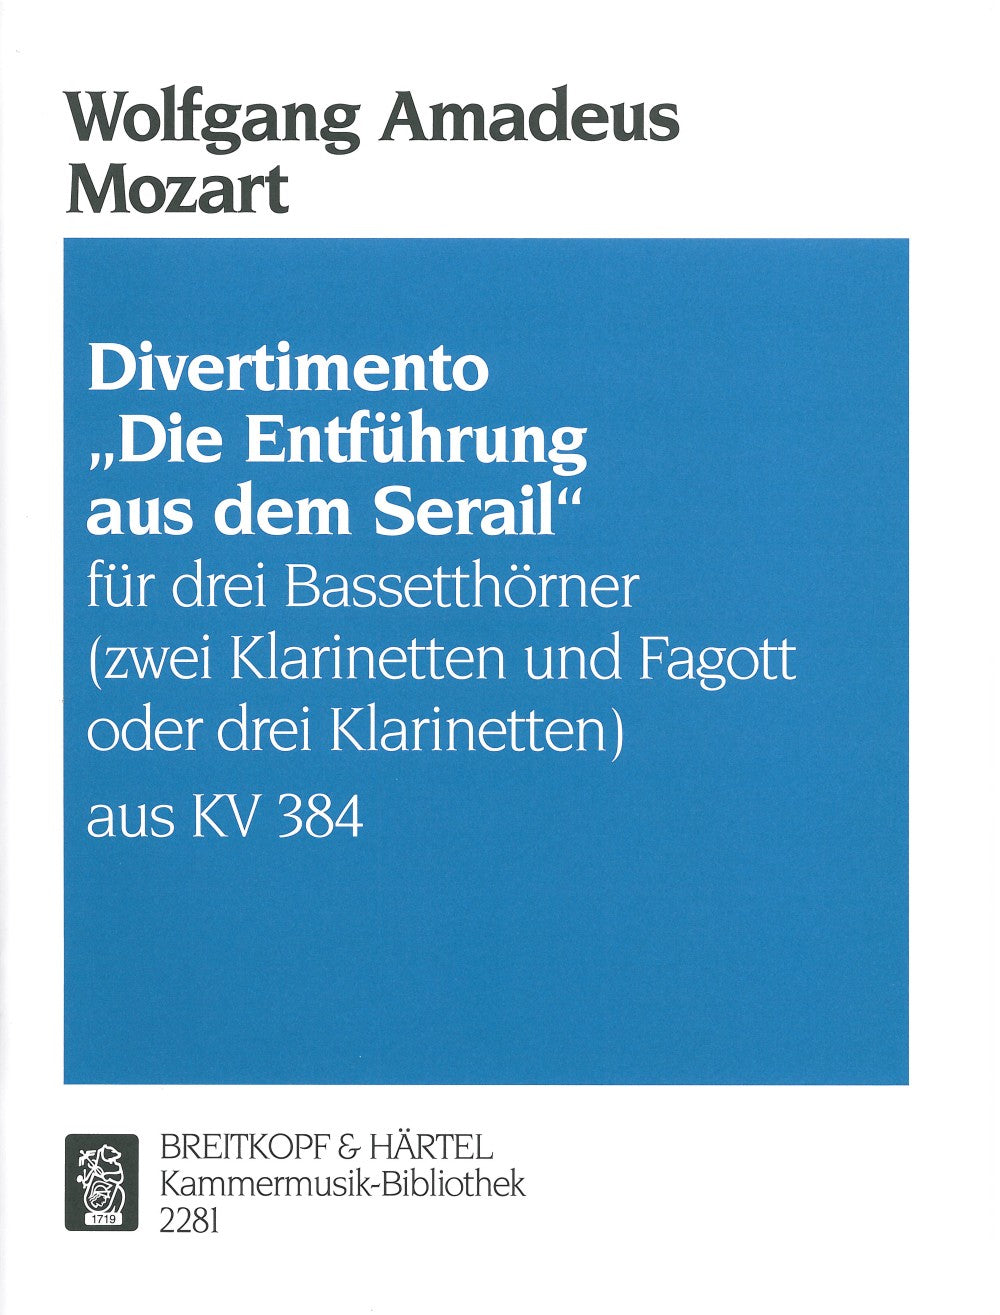 Mozart: Divertimento "The Abduction from the Seraglio" (arr. for 3 basset horns)